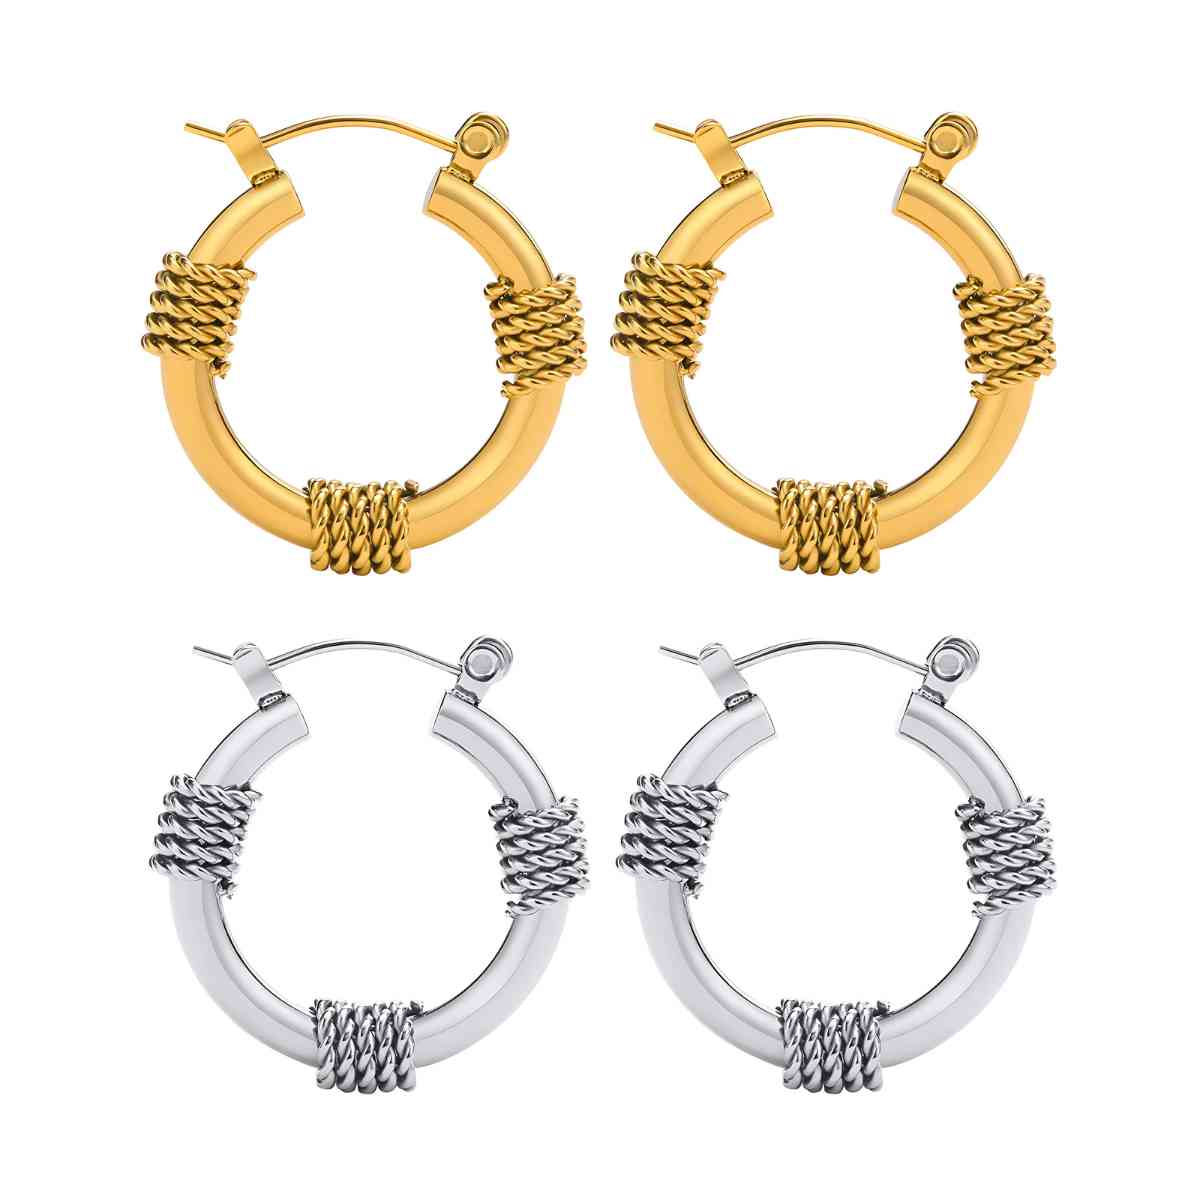 Rope Knot Hoop Earrings Silver and Gold Xenos Jewelry